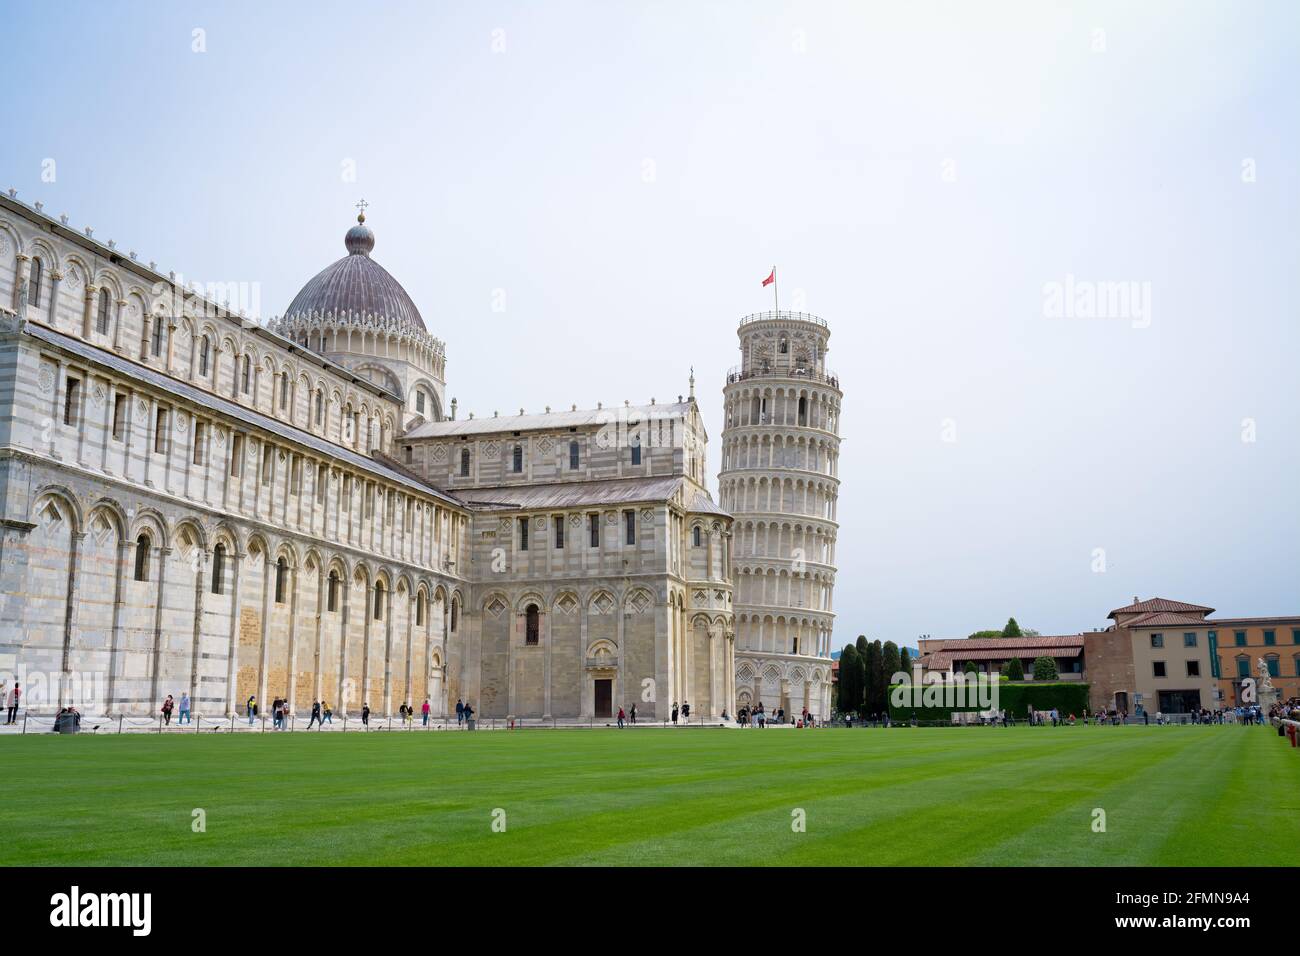 Pisa - May 2021: Square of Miracles (Piazza dei Miracoli) and the Leaning Tower of Pisa (Torre pendente), Tuscany, Italy Stock Photo